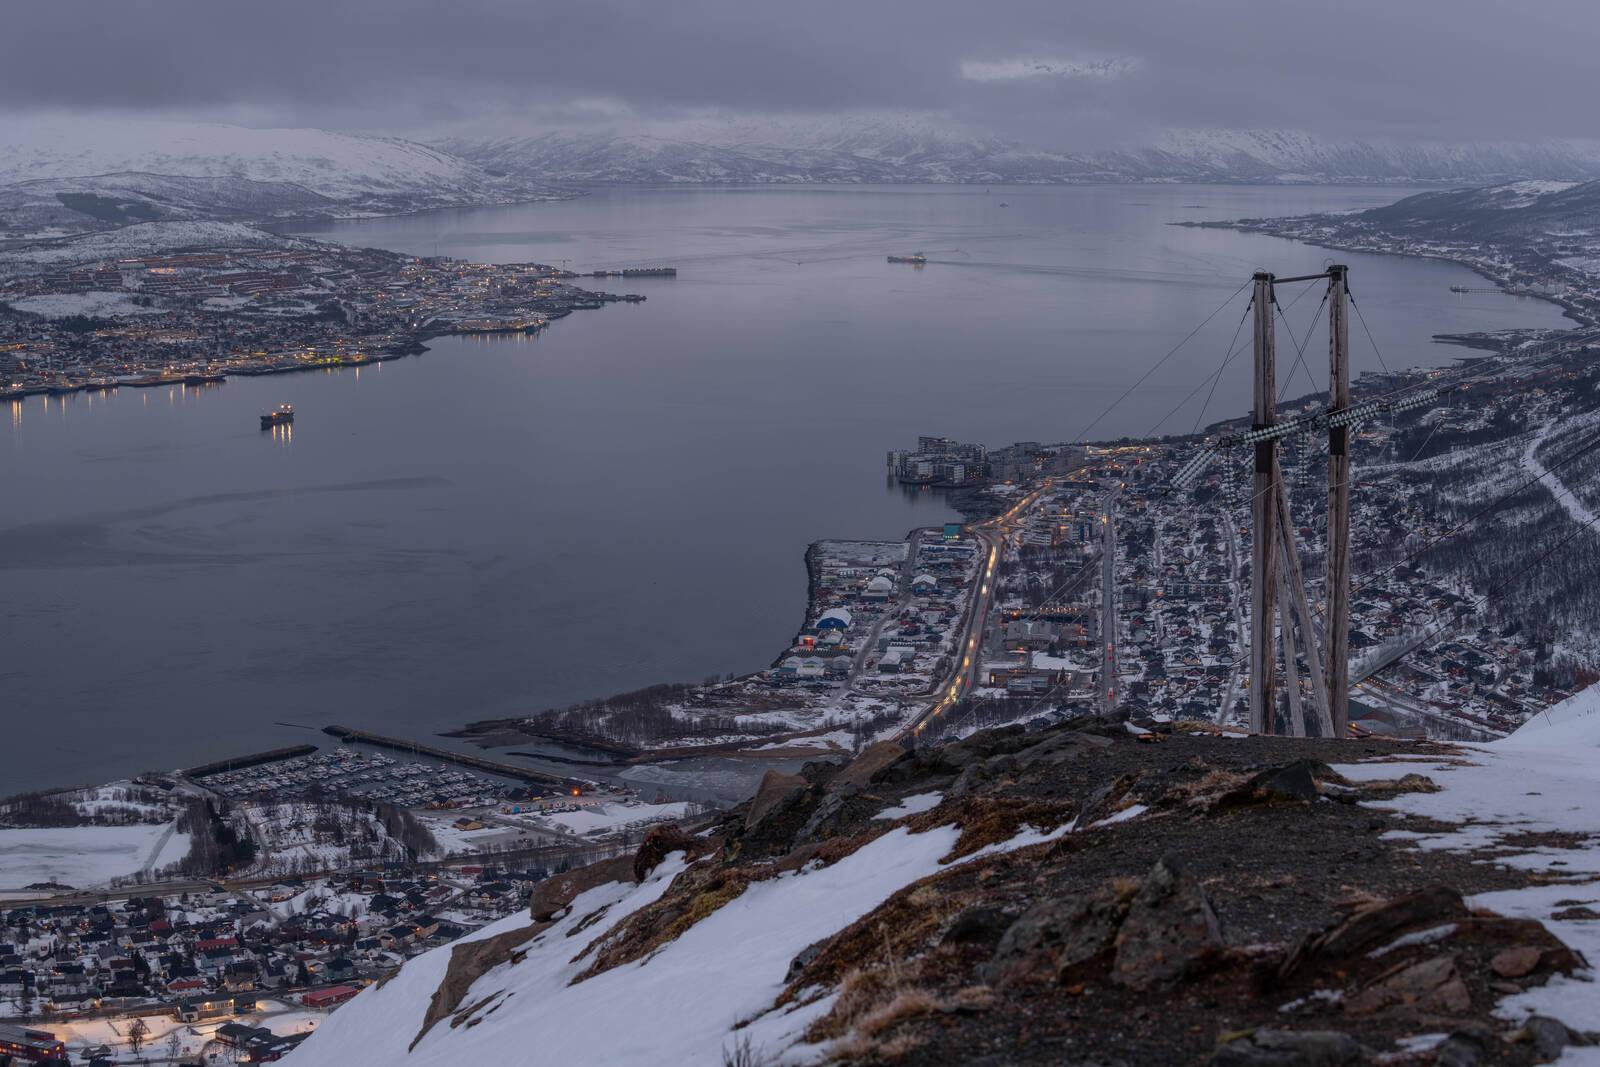 Image of Tromso City Viewpoint by michael bennett